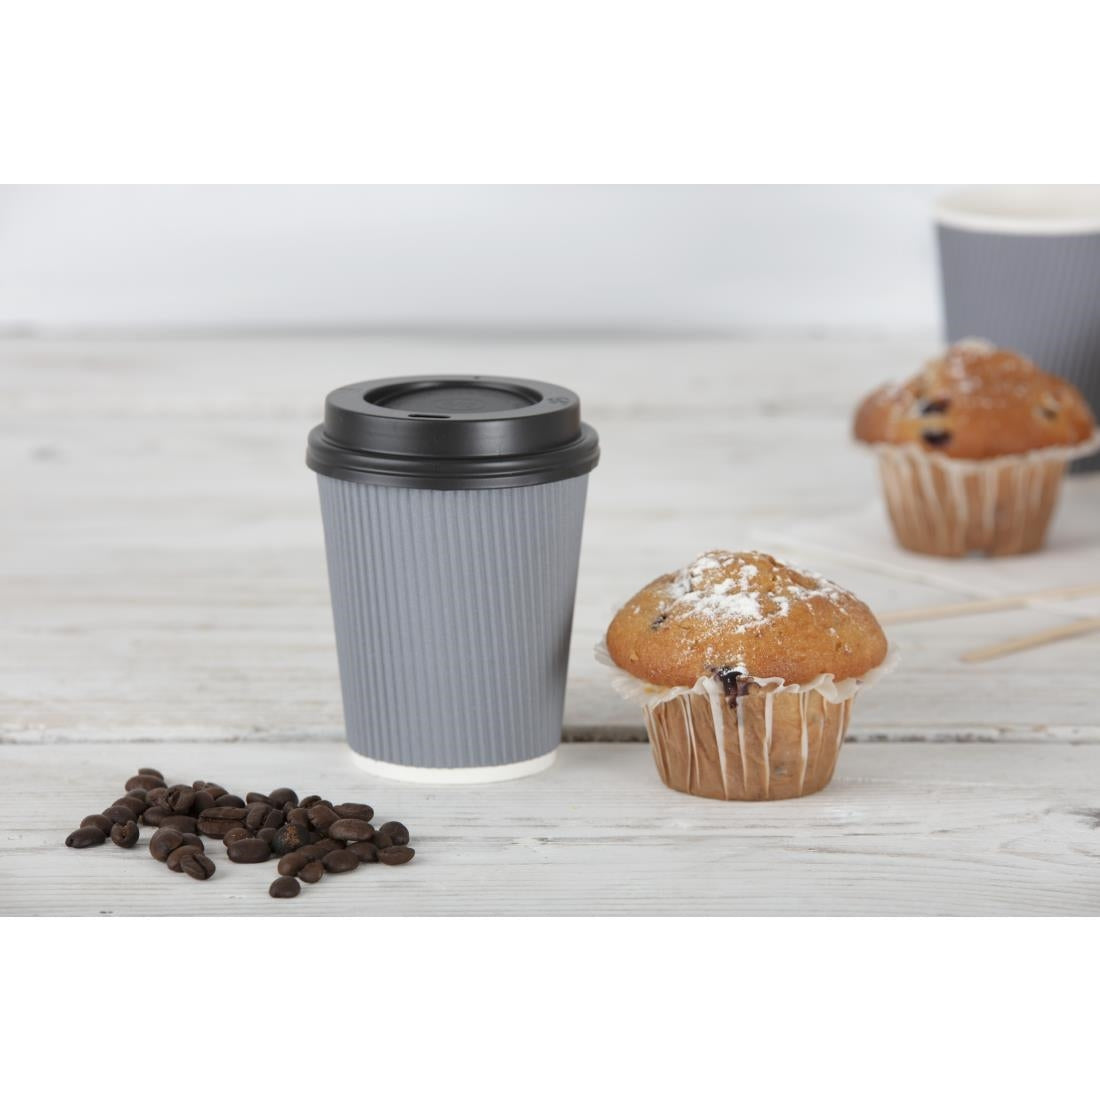 Fiesta Disposable Coffee Cups Ripple Wall Charcoal 340ml / 12oz (Pack of 25) JD Catering Equipment Solutions Ltd